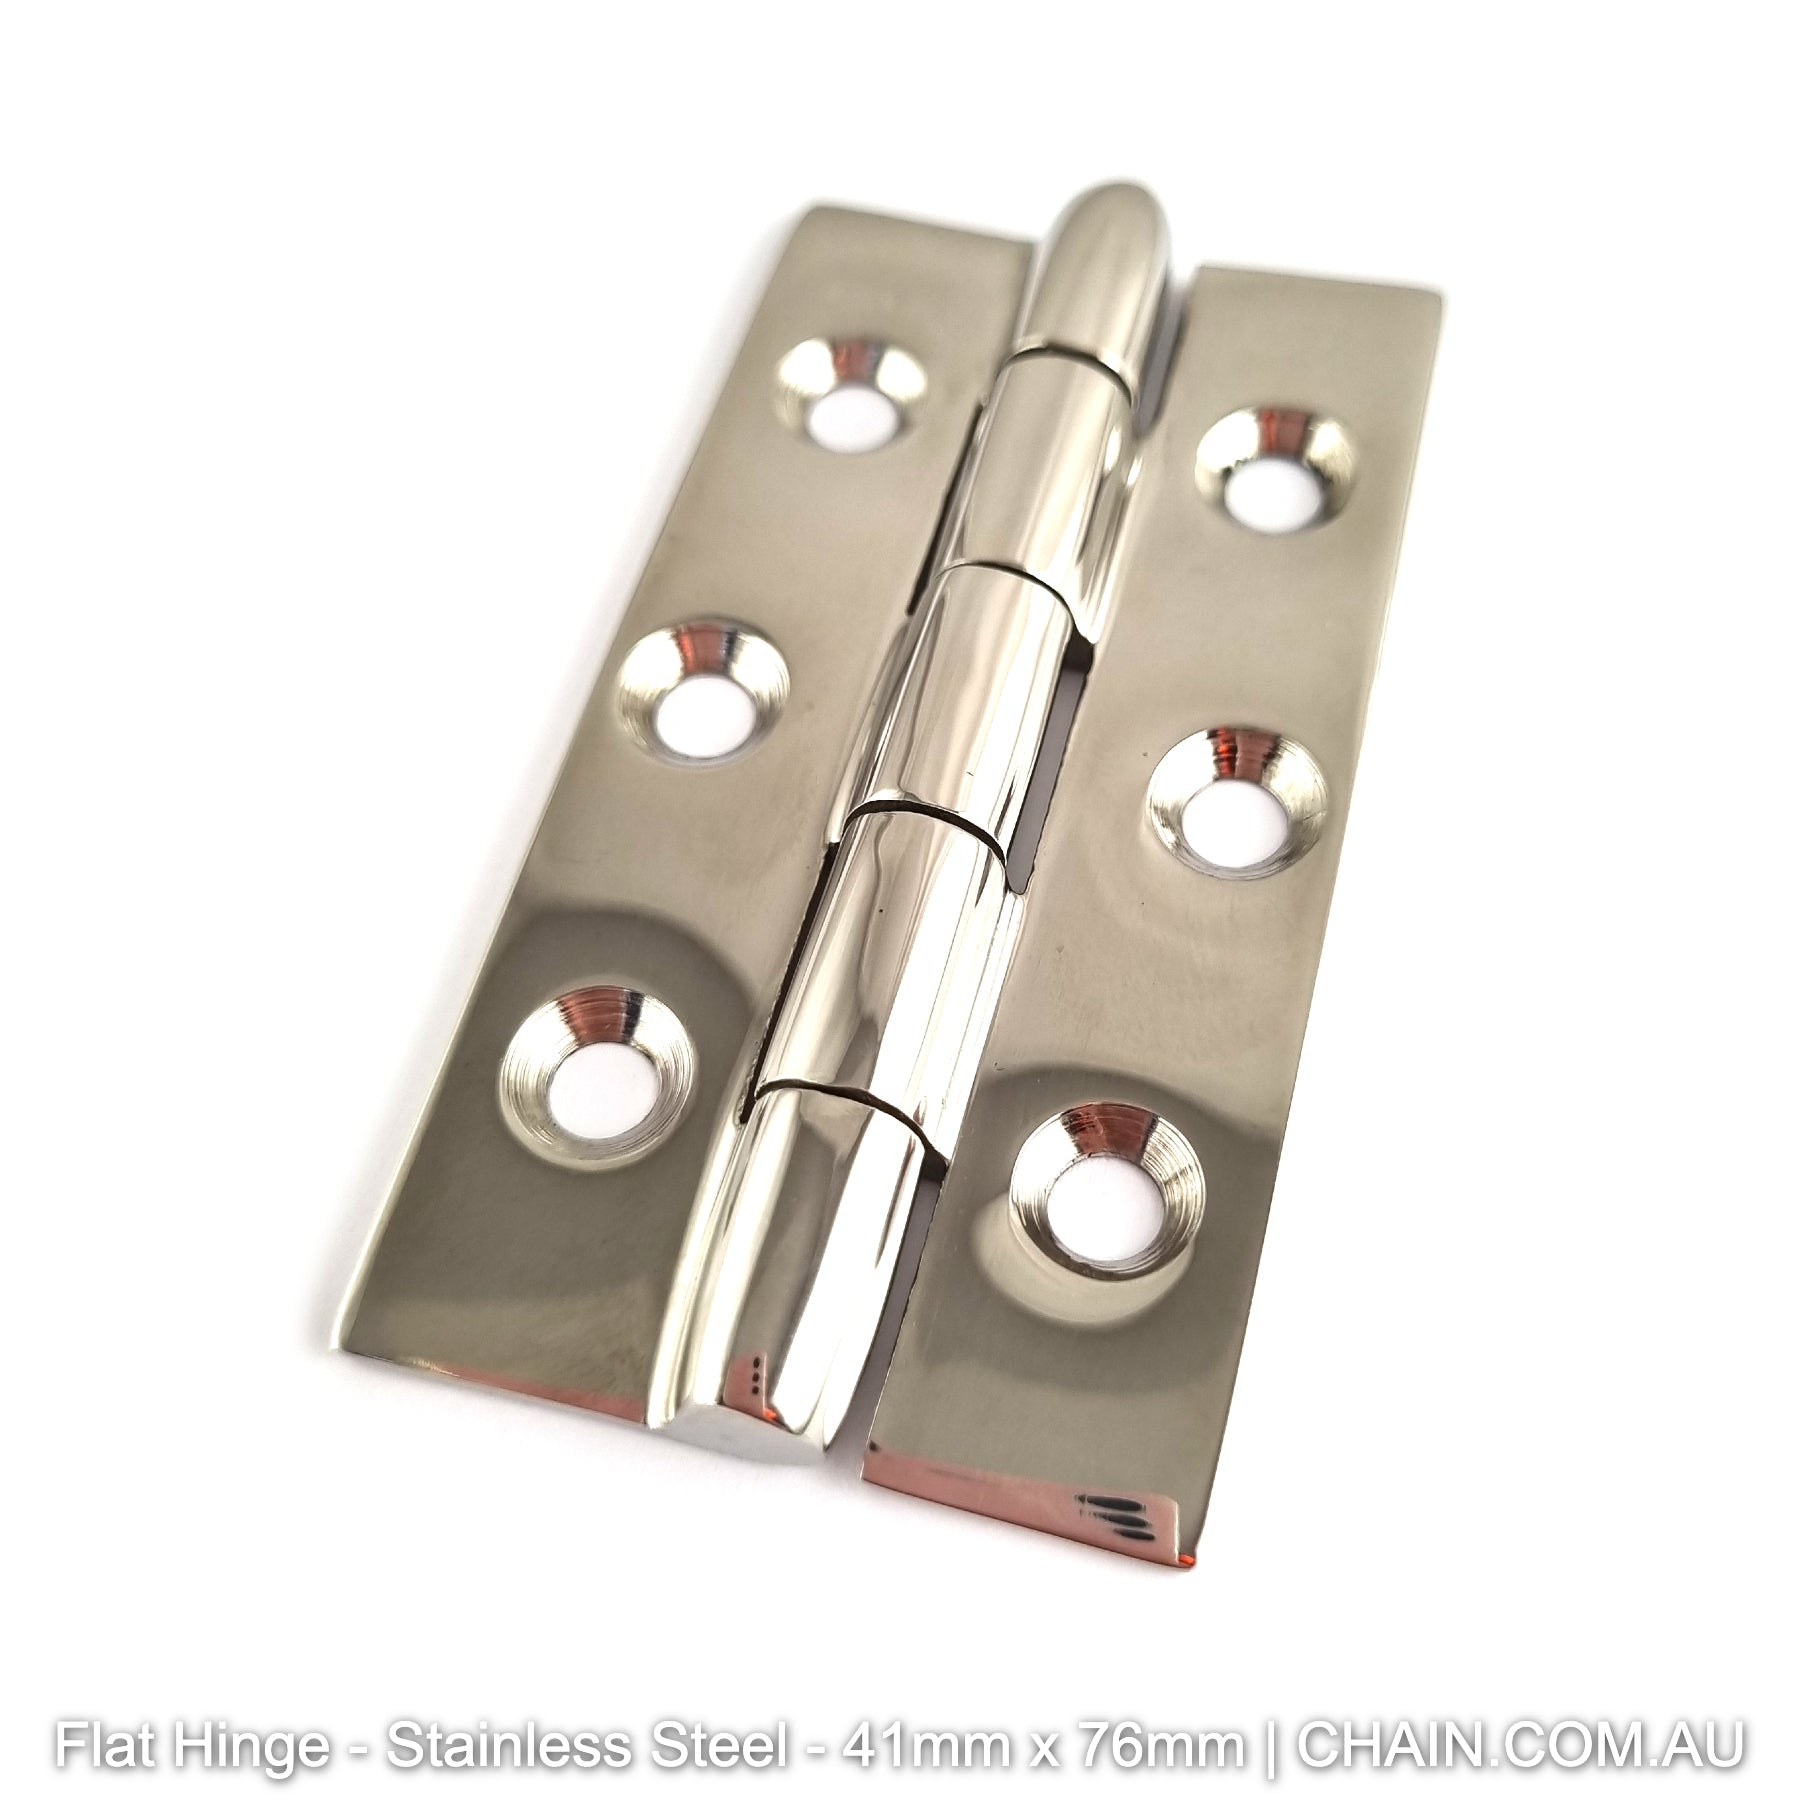 Stainless Steel Flat Hinge. Size: 41mm x 76mm. Shop online chain.com.au. Shipping Australia wide.